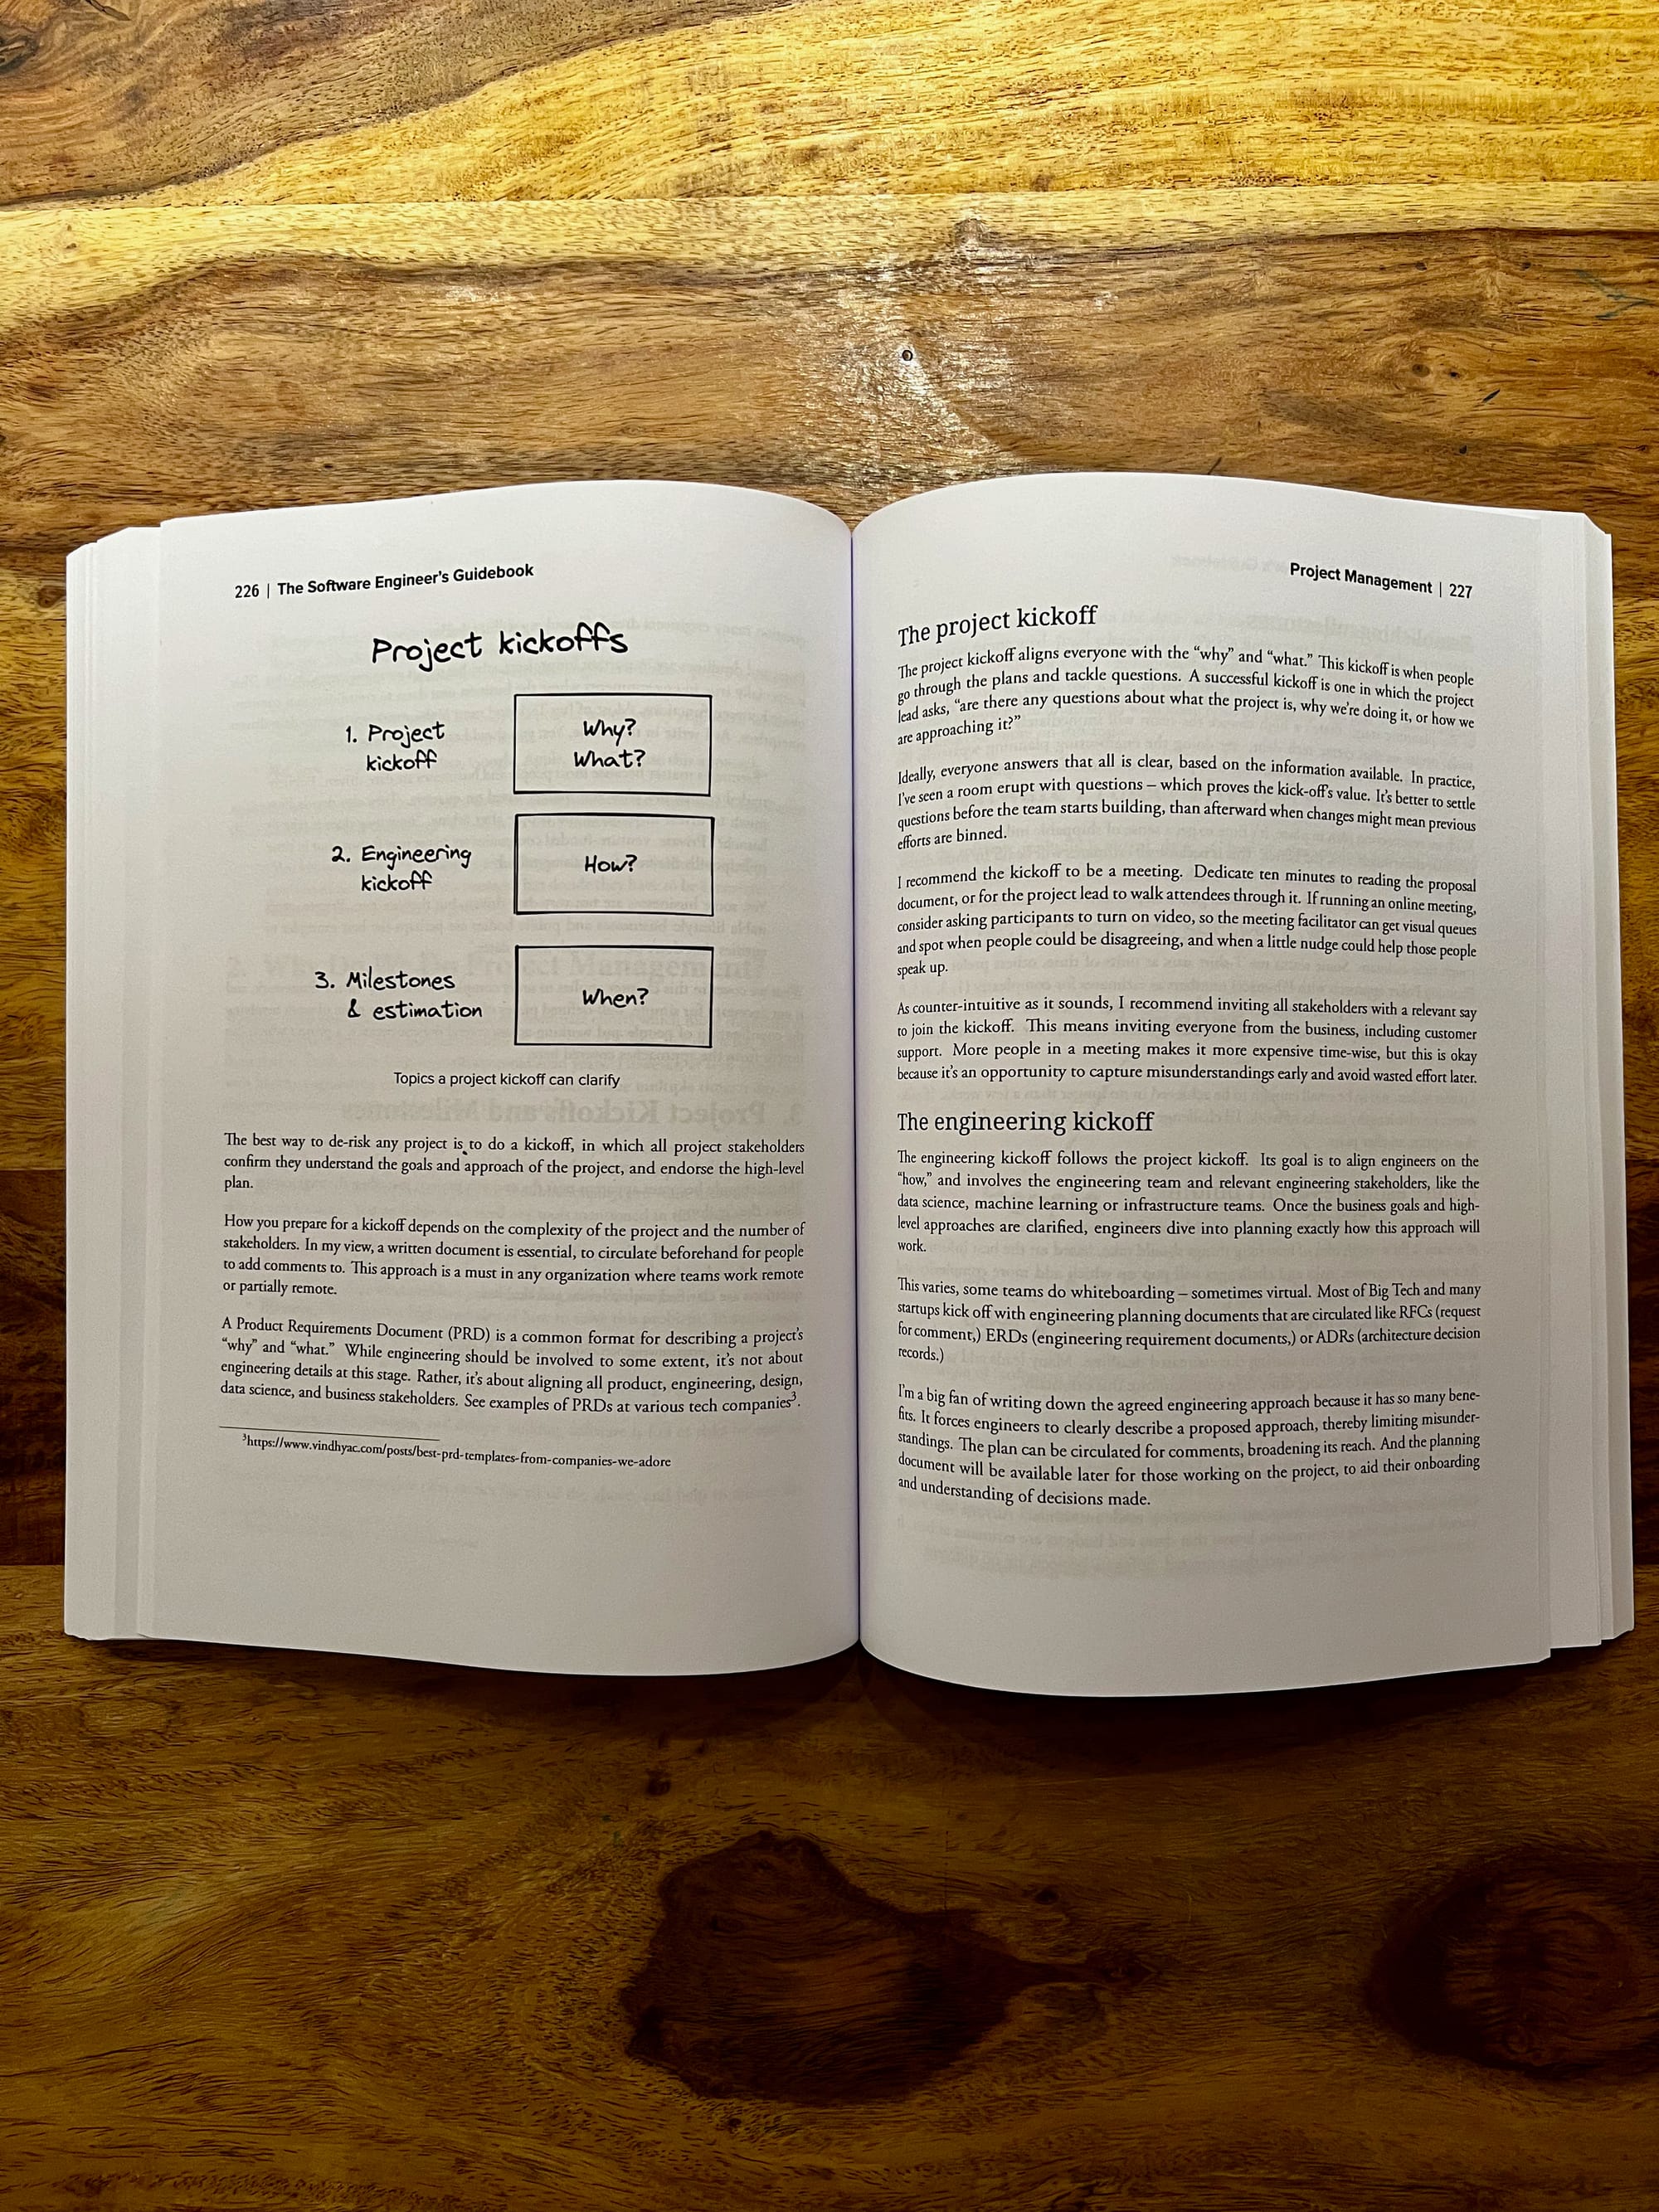 "The Software Engineer's Guidebook" by Gergely Orosz